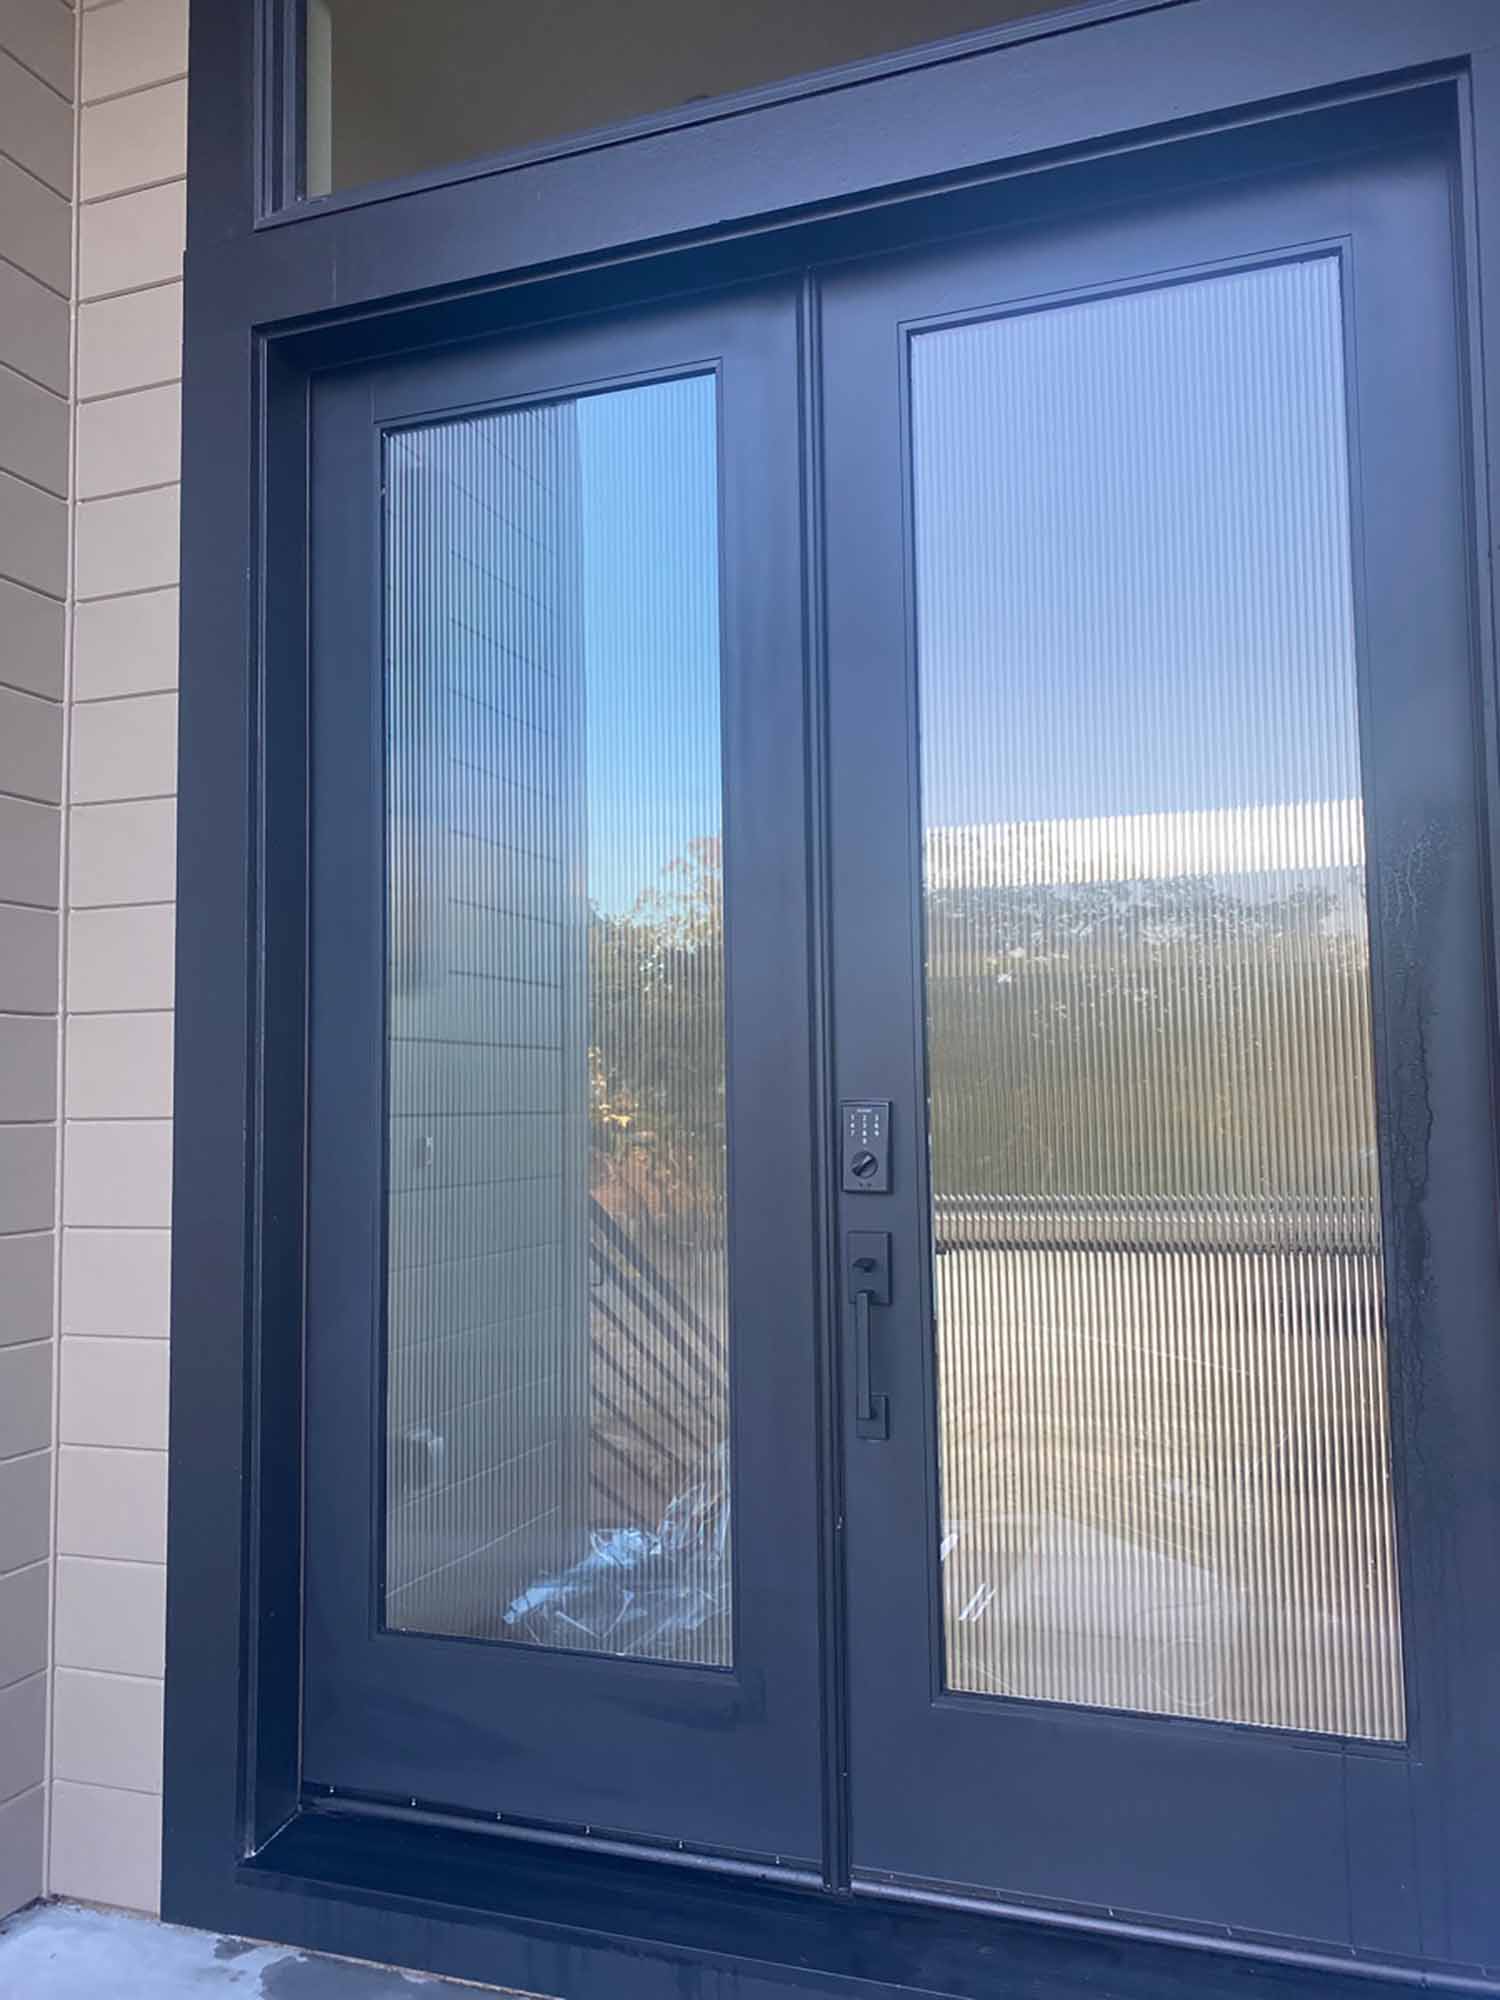 Exterior Window Film In Use: Santa Rosa, CA. Installed by ClimatePro.